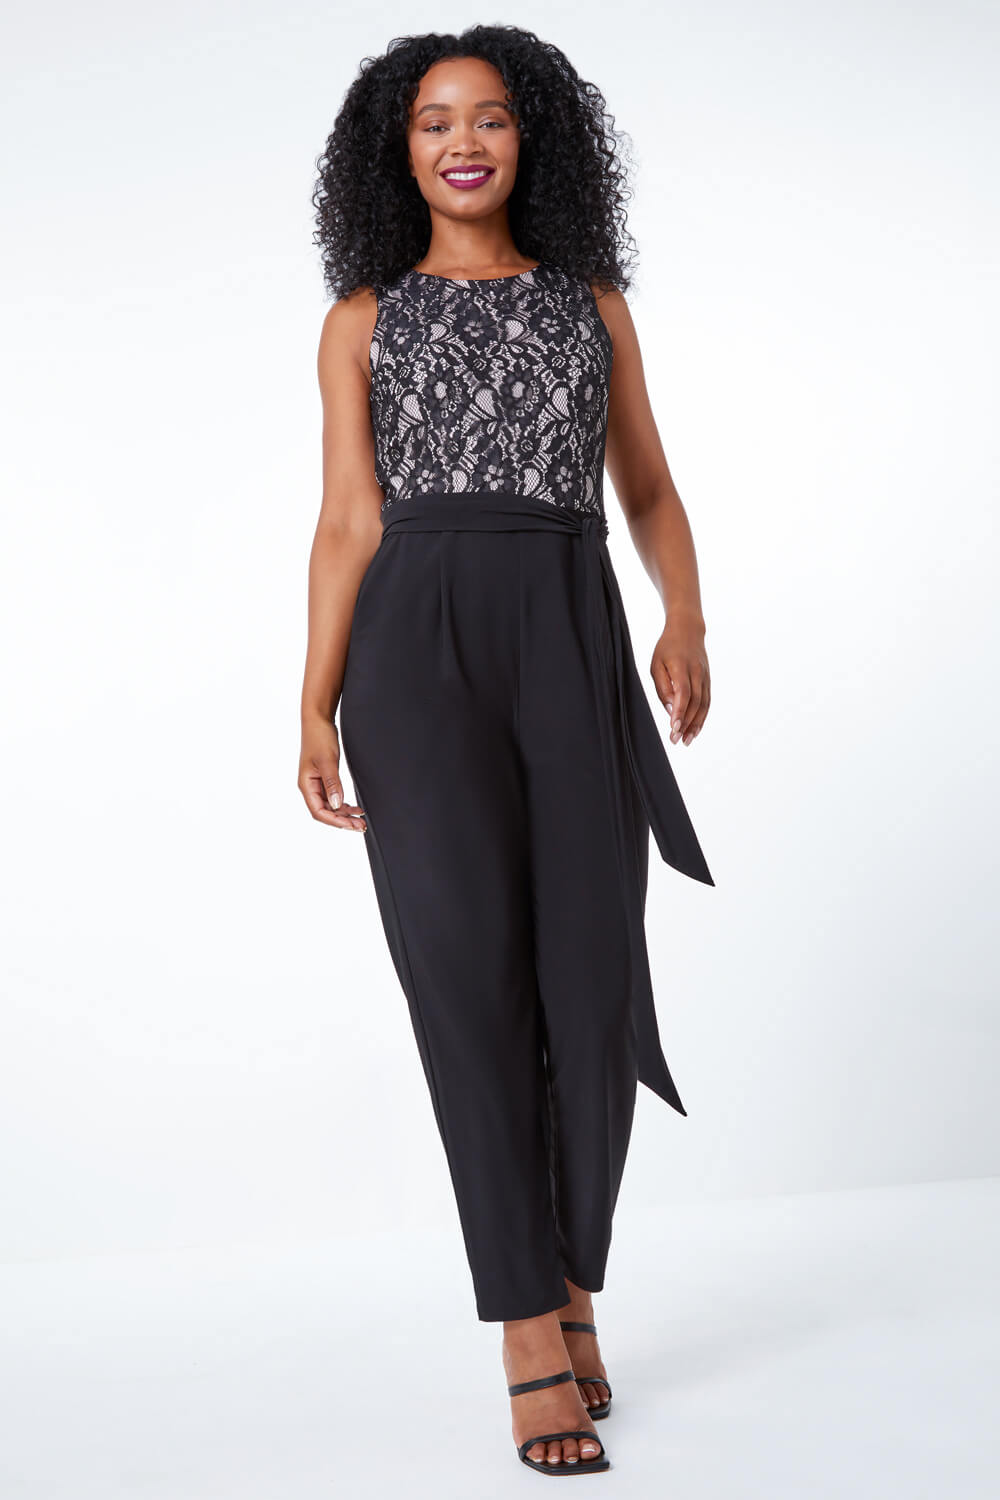 Black Petite Lace Belted Stretch Jumpsuit, Image 2 of 5